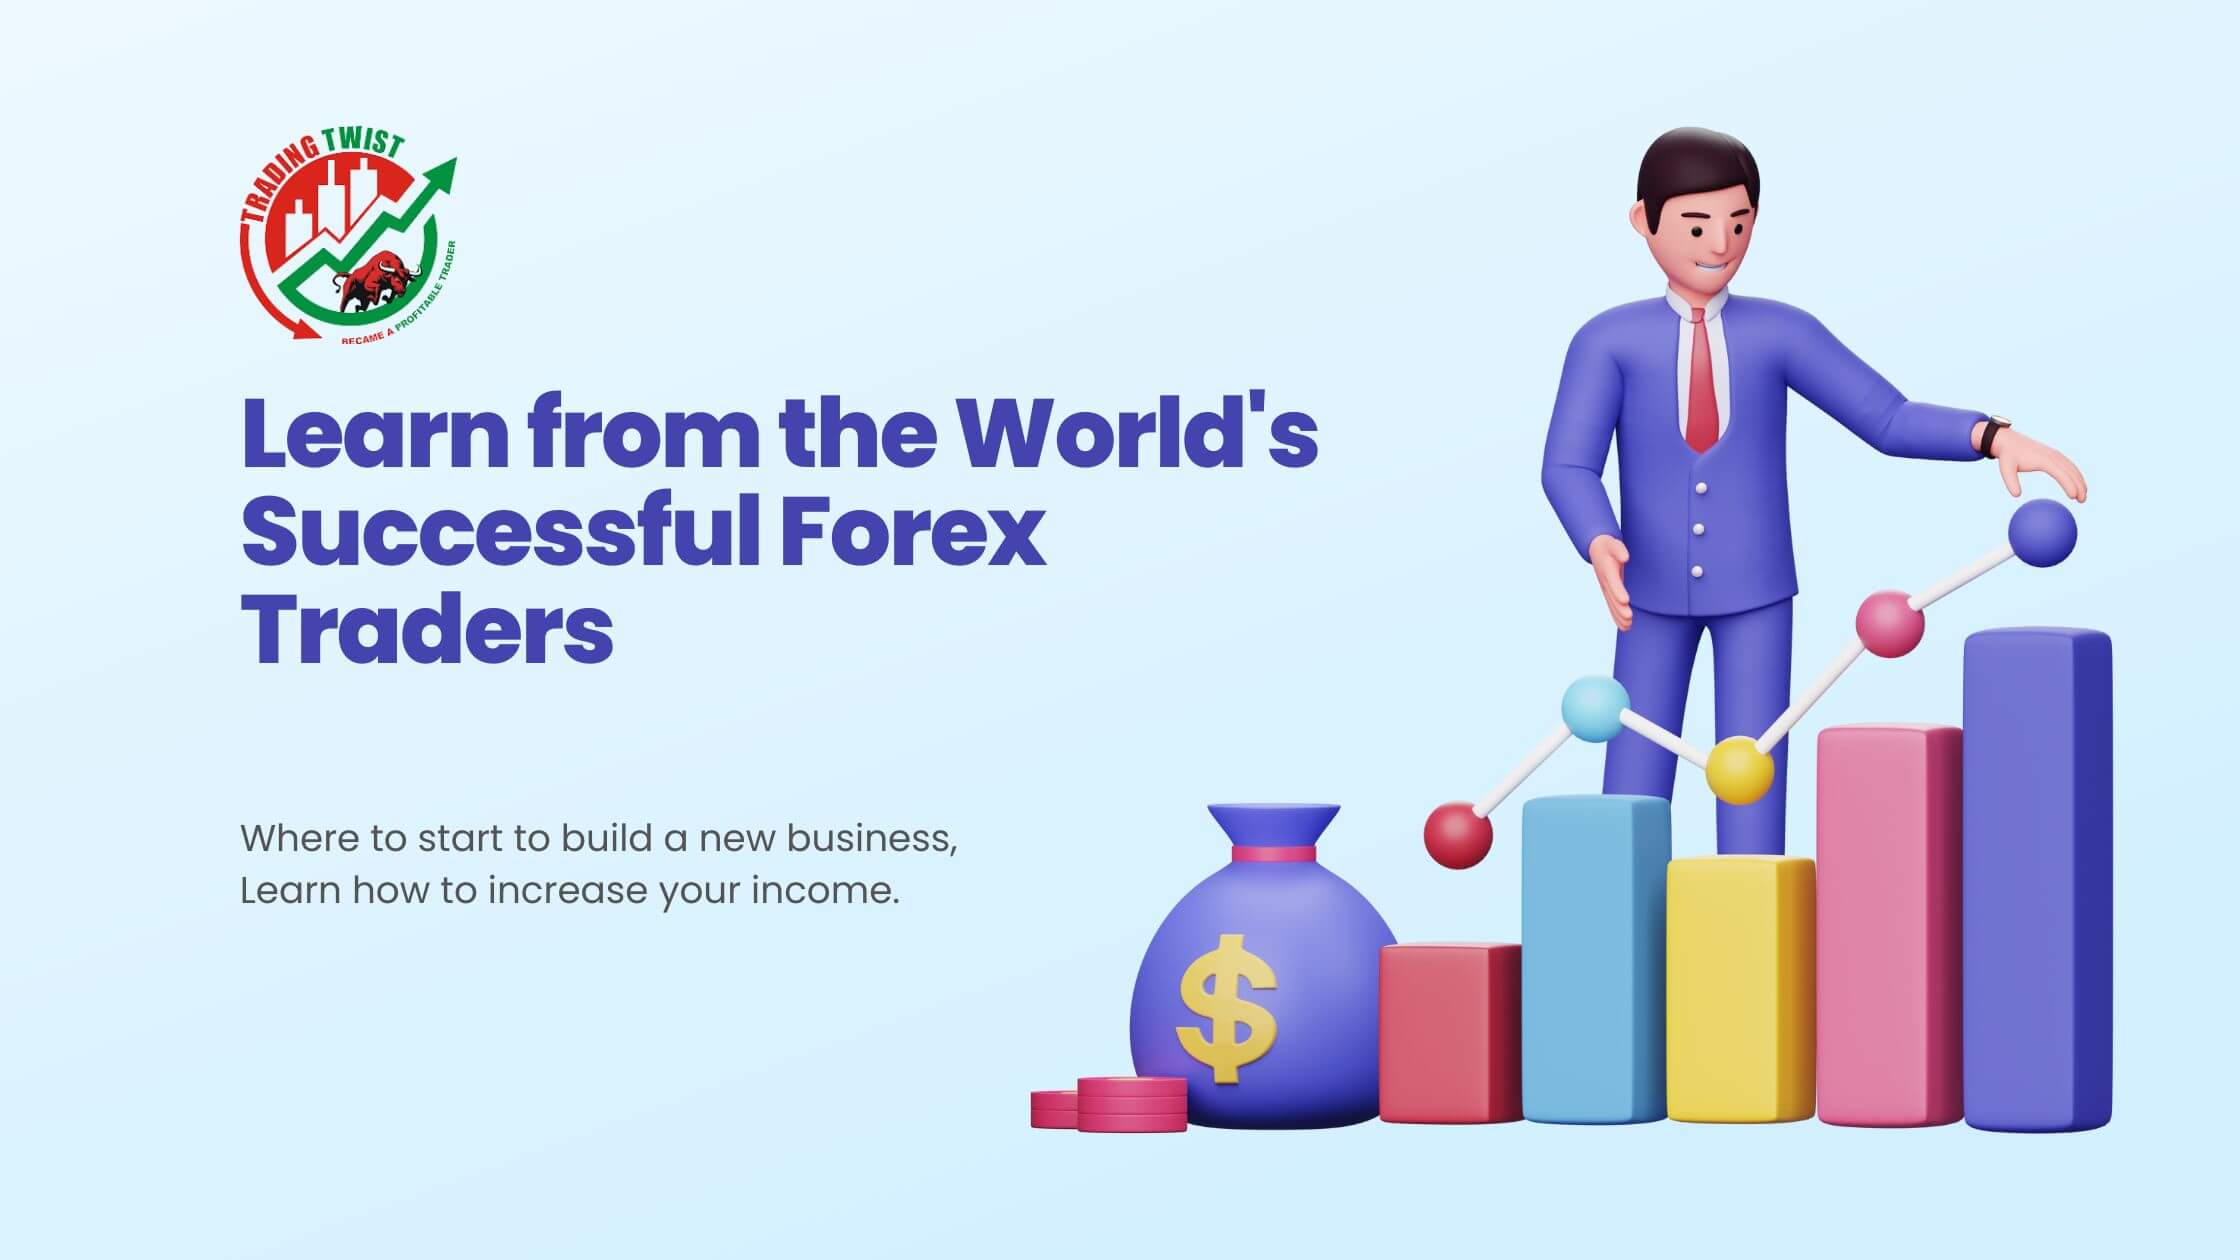 learn from the world's successful Forex traders